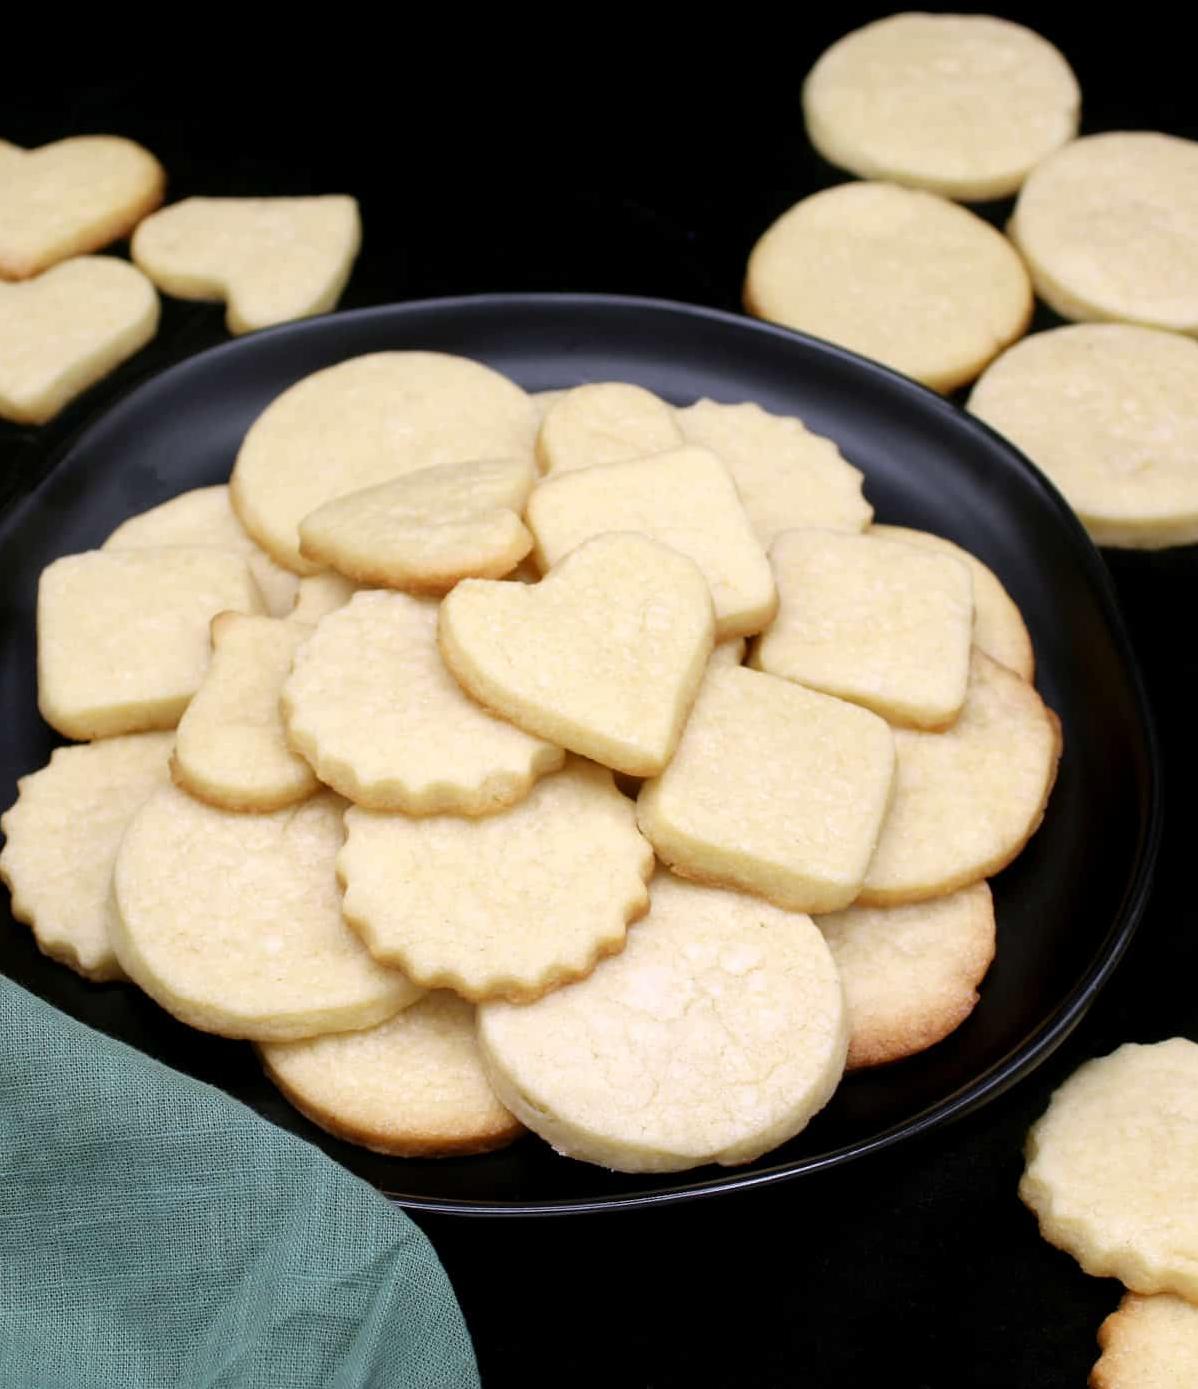  Keep the cookie cutters coming, these vegan sugar cookies are a hit!